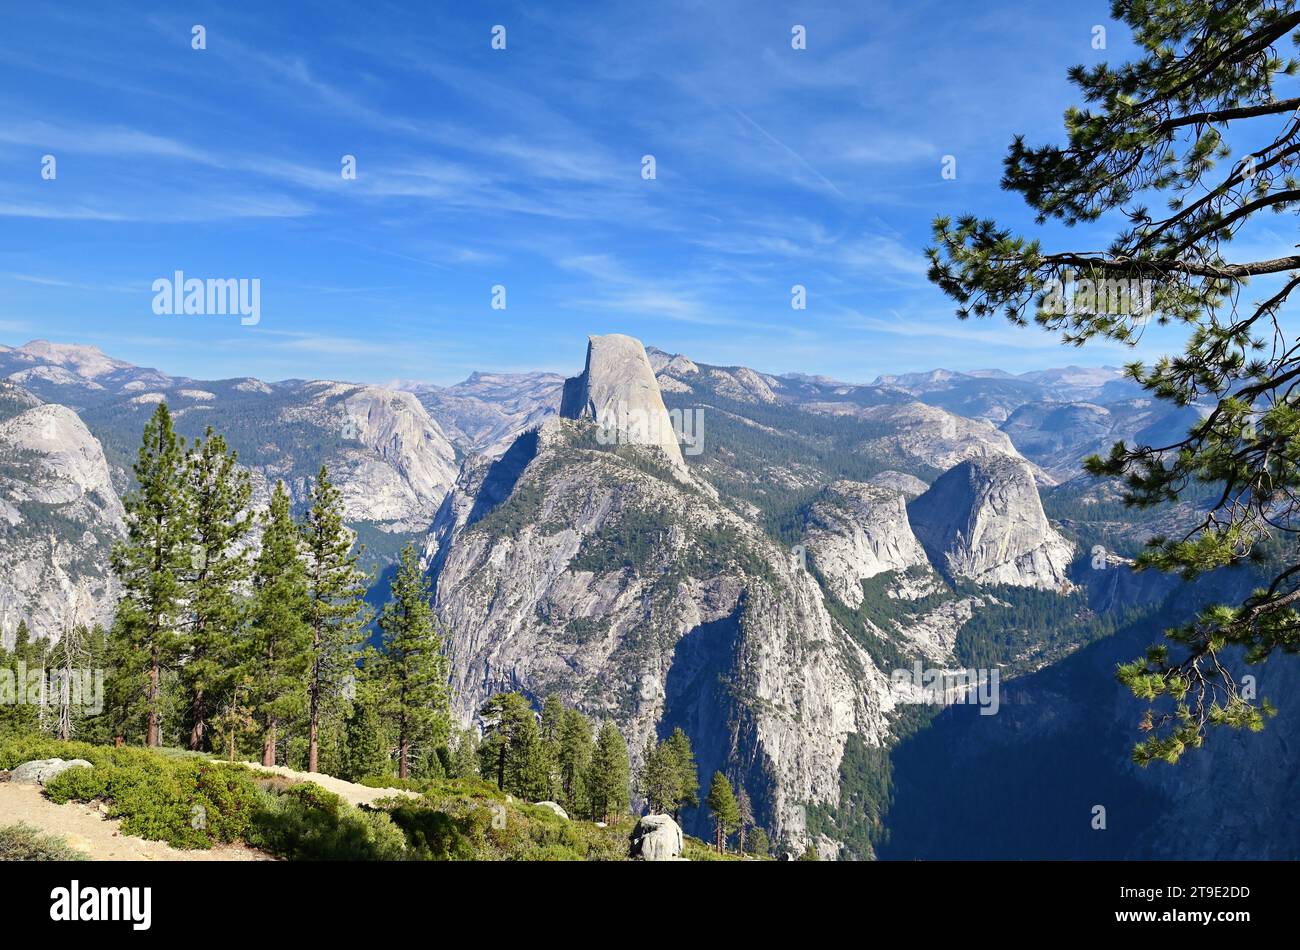 Yosemite National Park, California, USA. A spectacular view of Half Dome surrounded by mountains beyond Yosemite Valley. Stock Photo